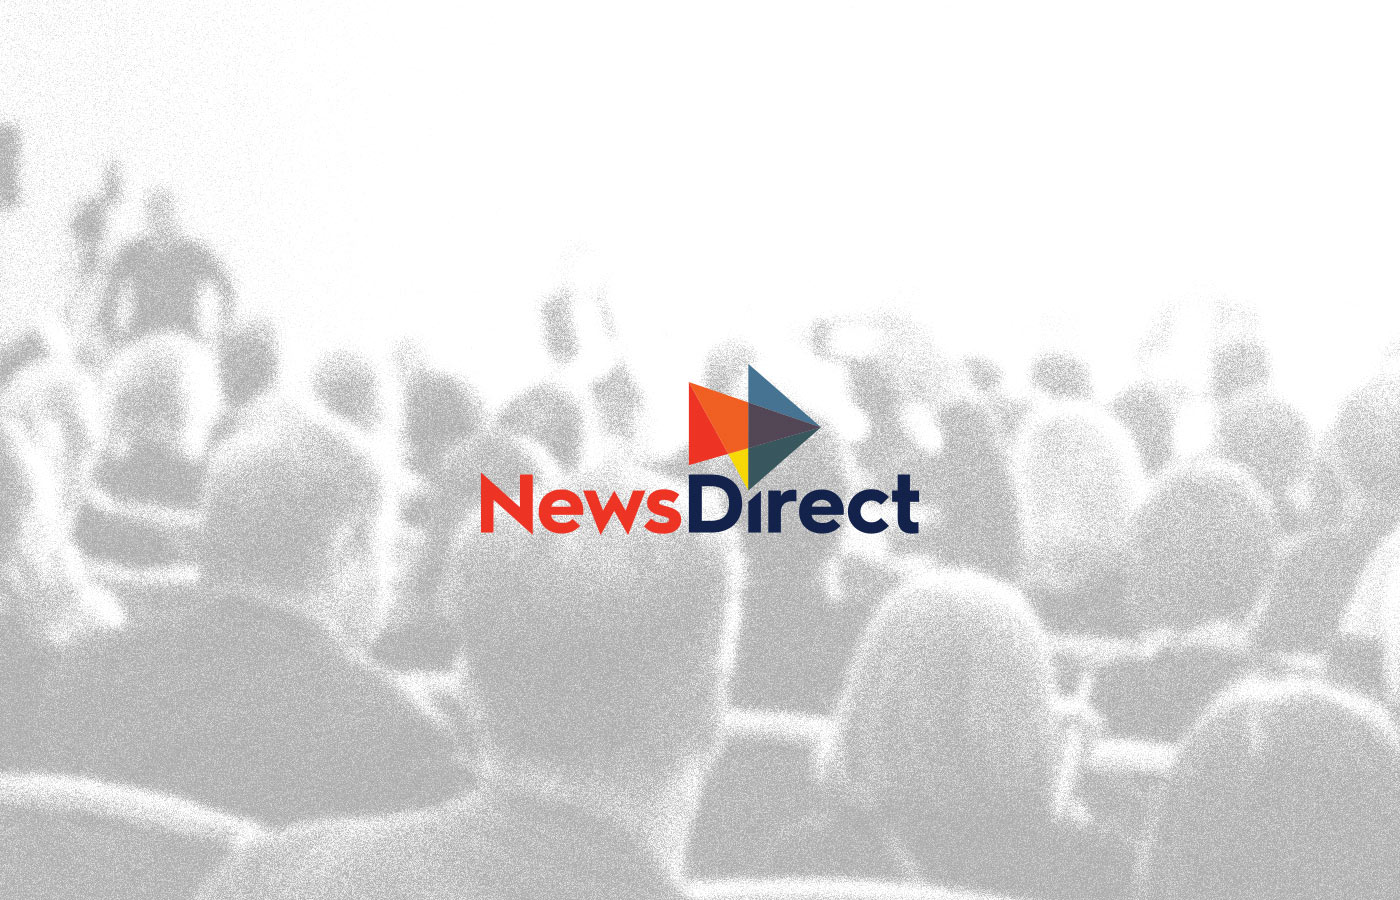 NewsDirect logo overlayed on an image of people attending a conference